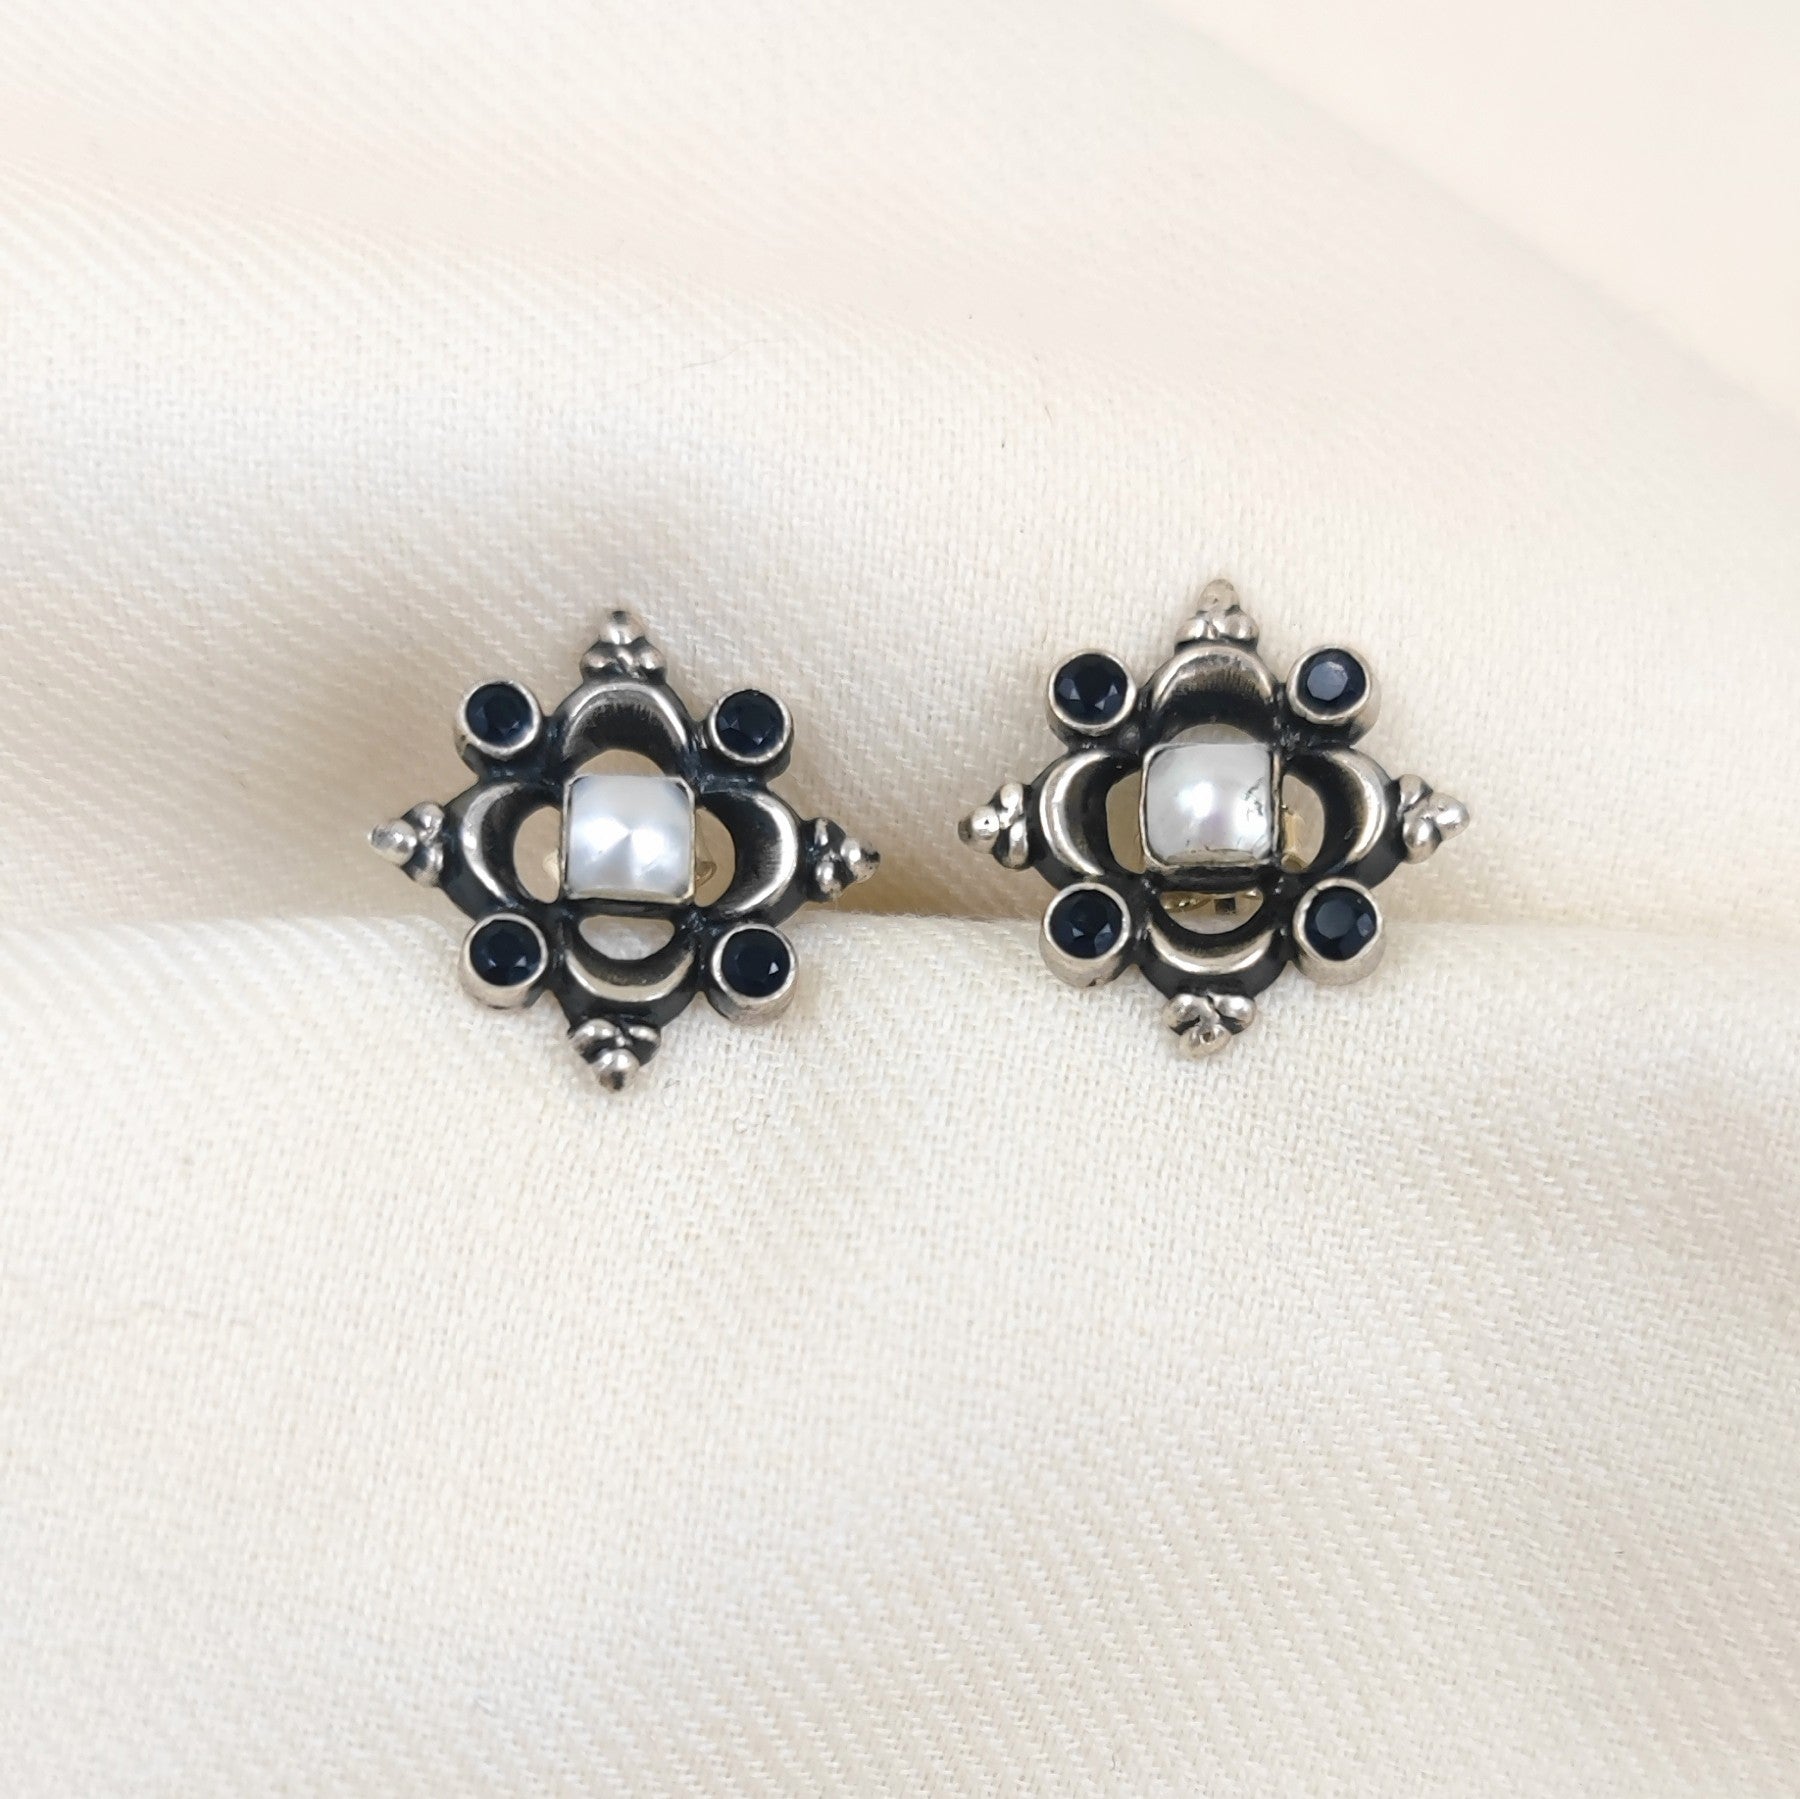 Silver Jewelry Earrings by Jauhri 92.5 Silver - Pearl Temple Studs